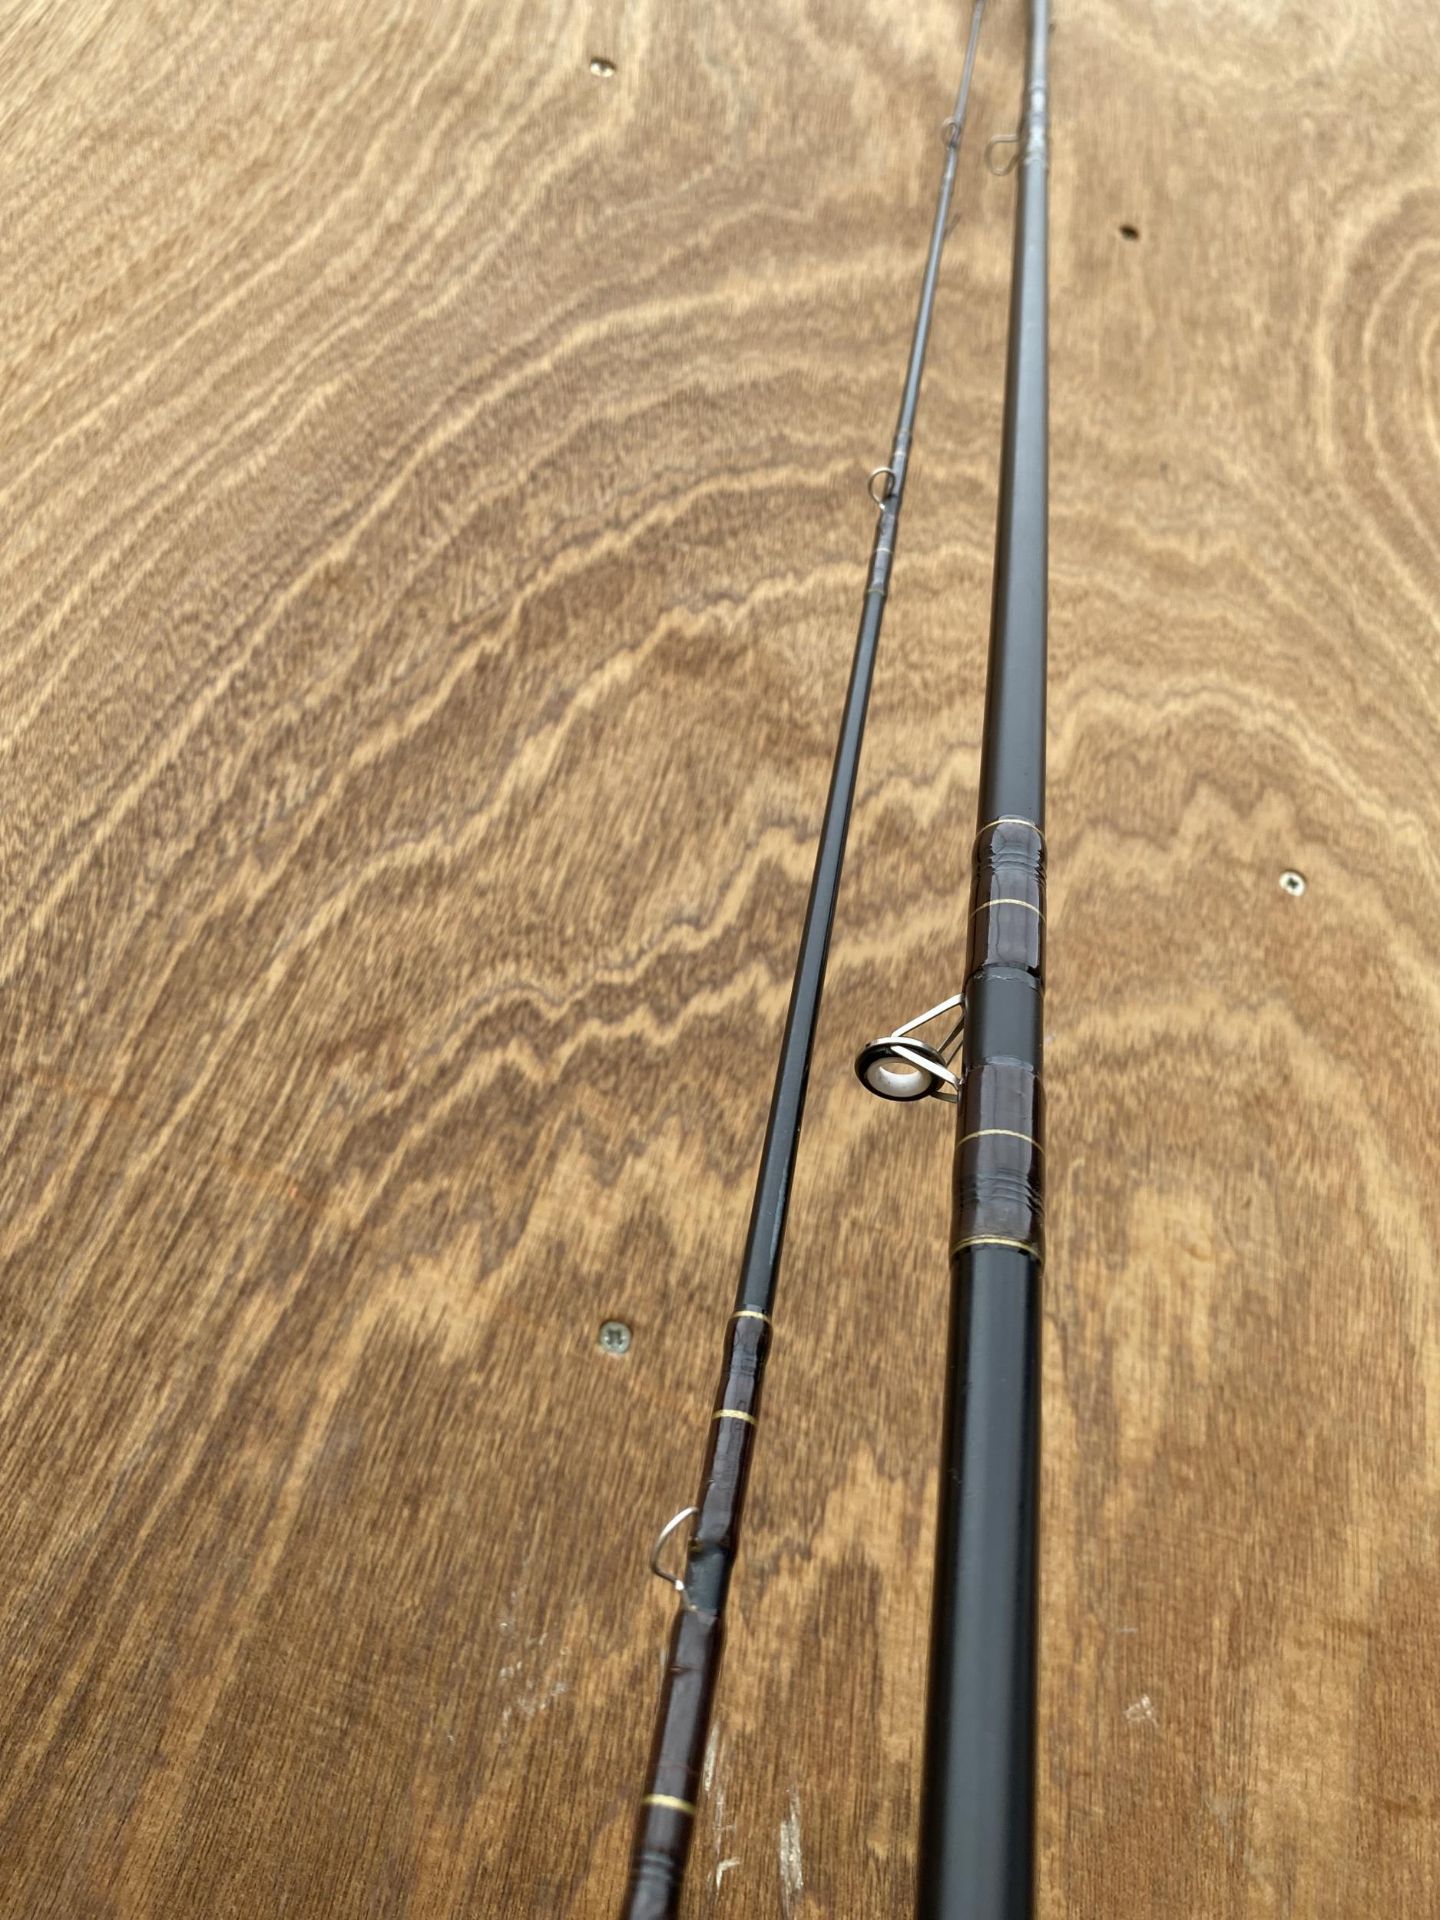 TWO FLY FISHING RODS CONSISTING OF AN ASTROBLACK 9'6" 8-9# AND A SHAKESPERE SIGMA GRAPHITE 8'10" 6- - Image 5 of 9